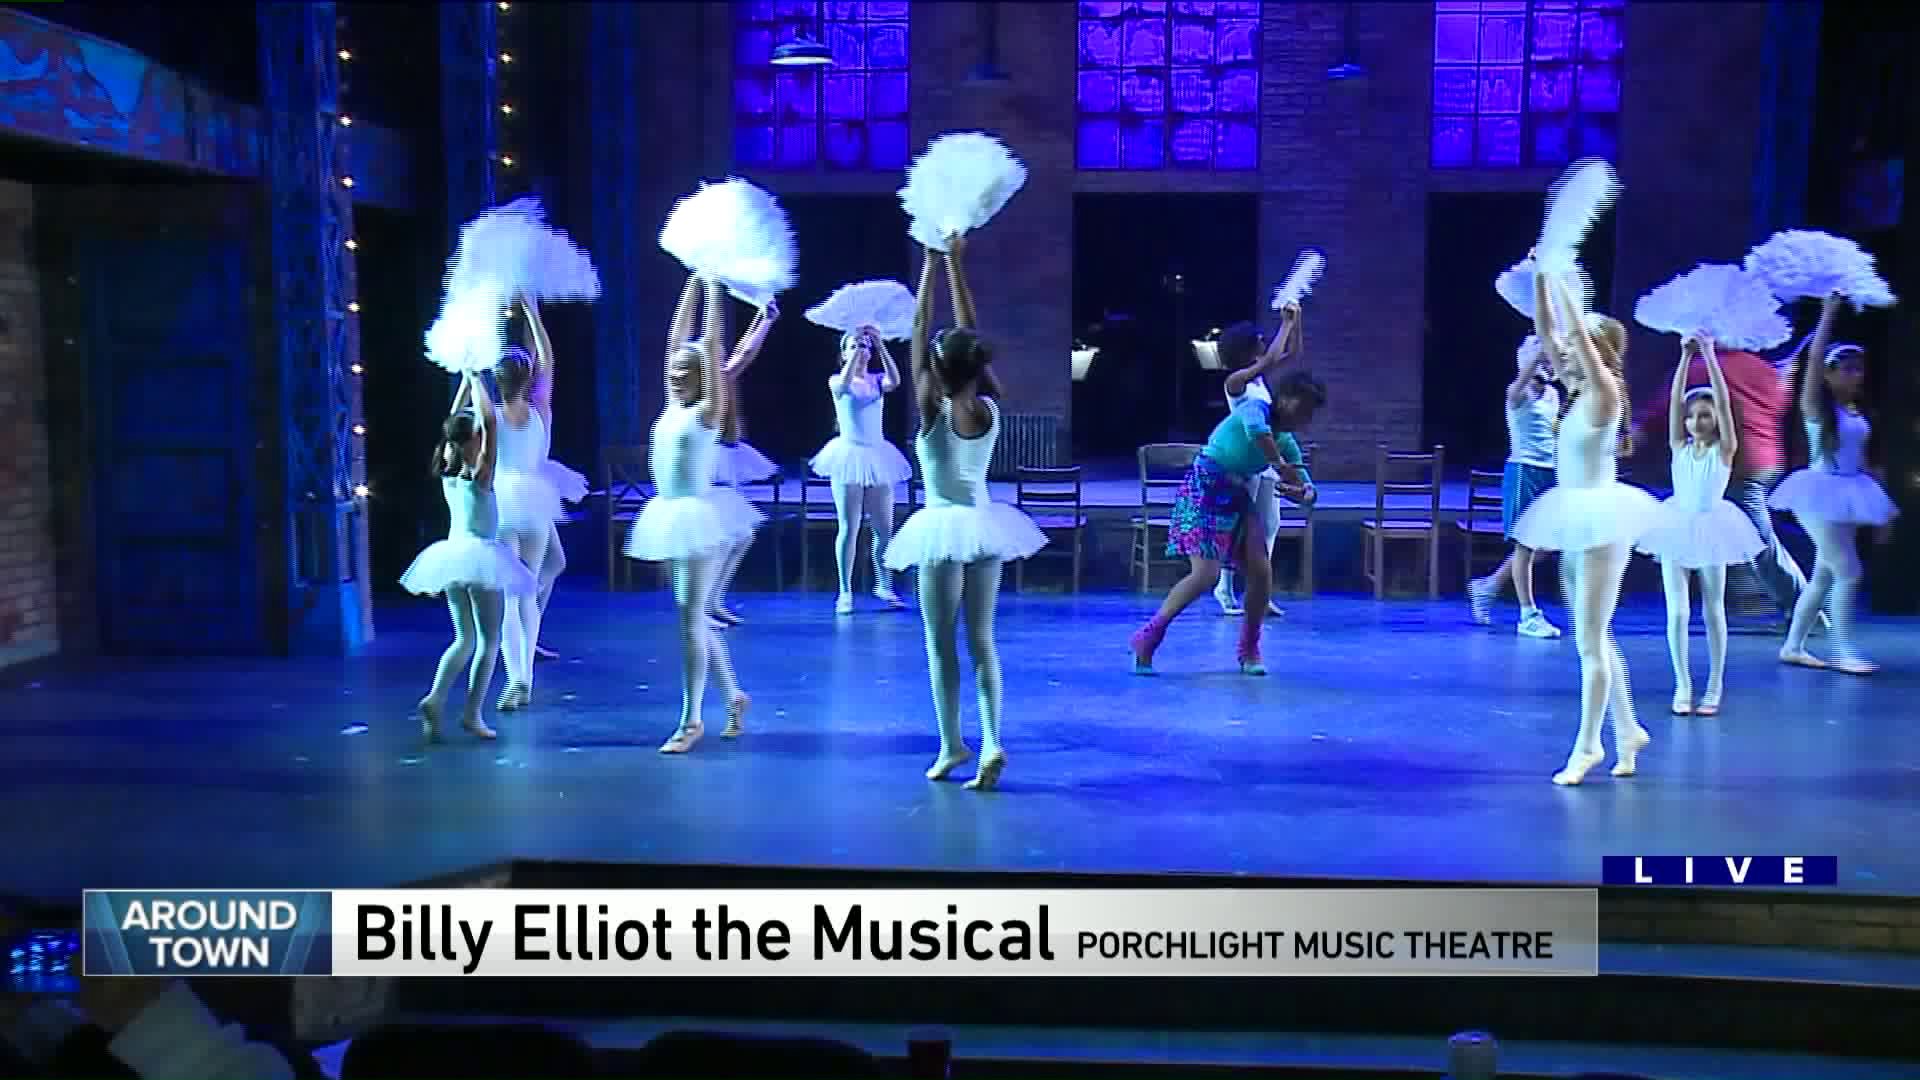 Around Town checks out Billy Elliot the Musical